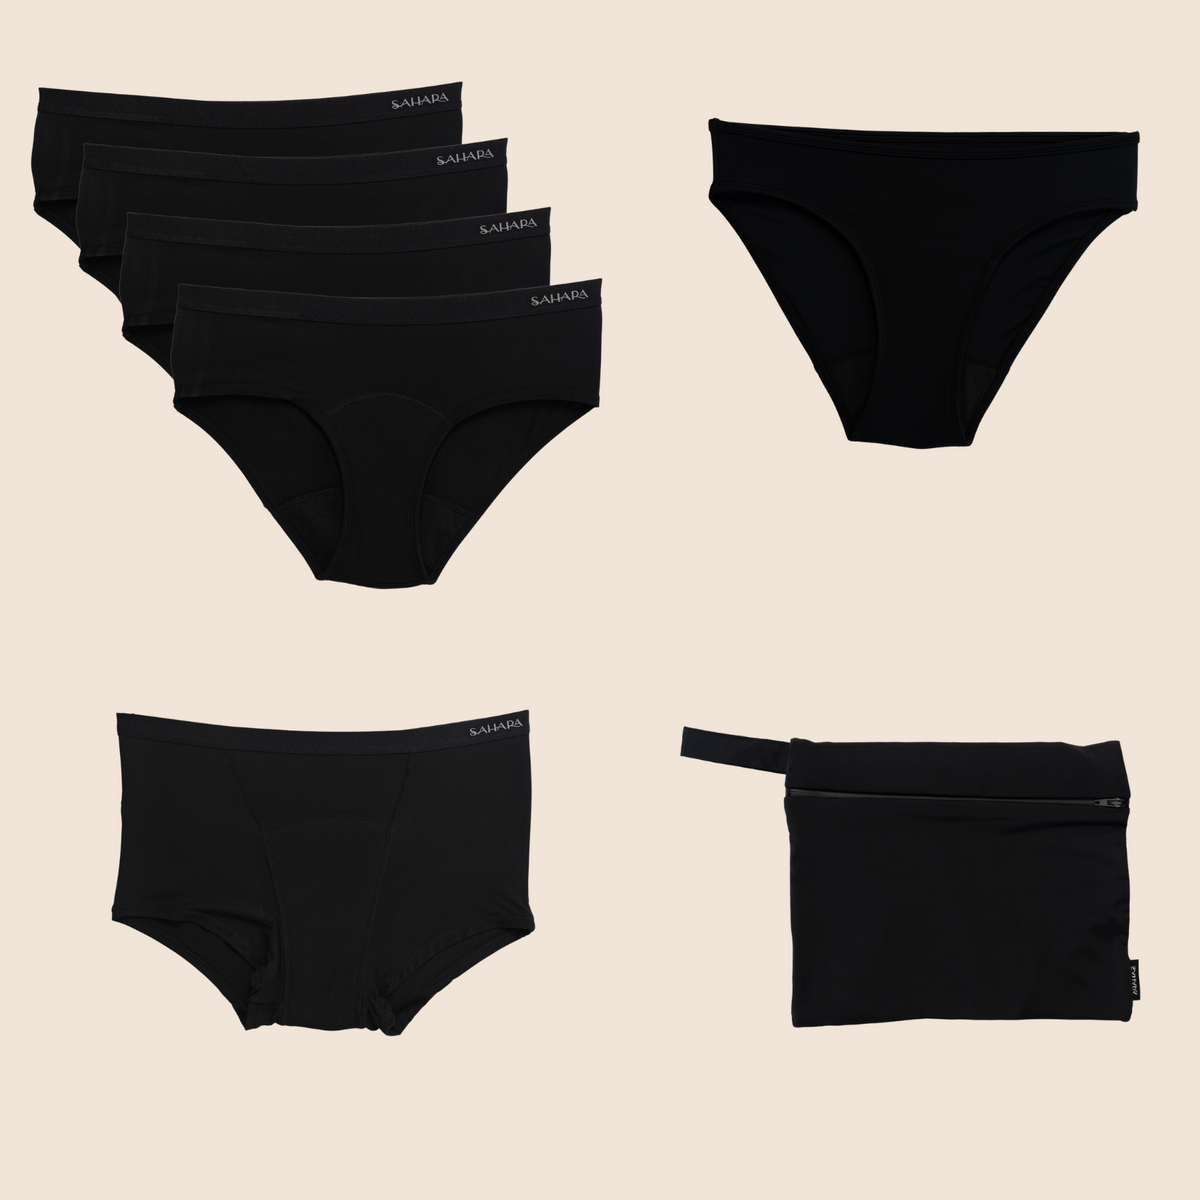 Teen and Women's Period Underwear Collection